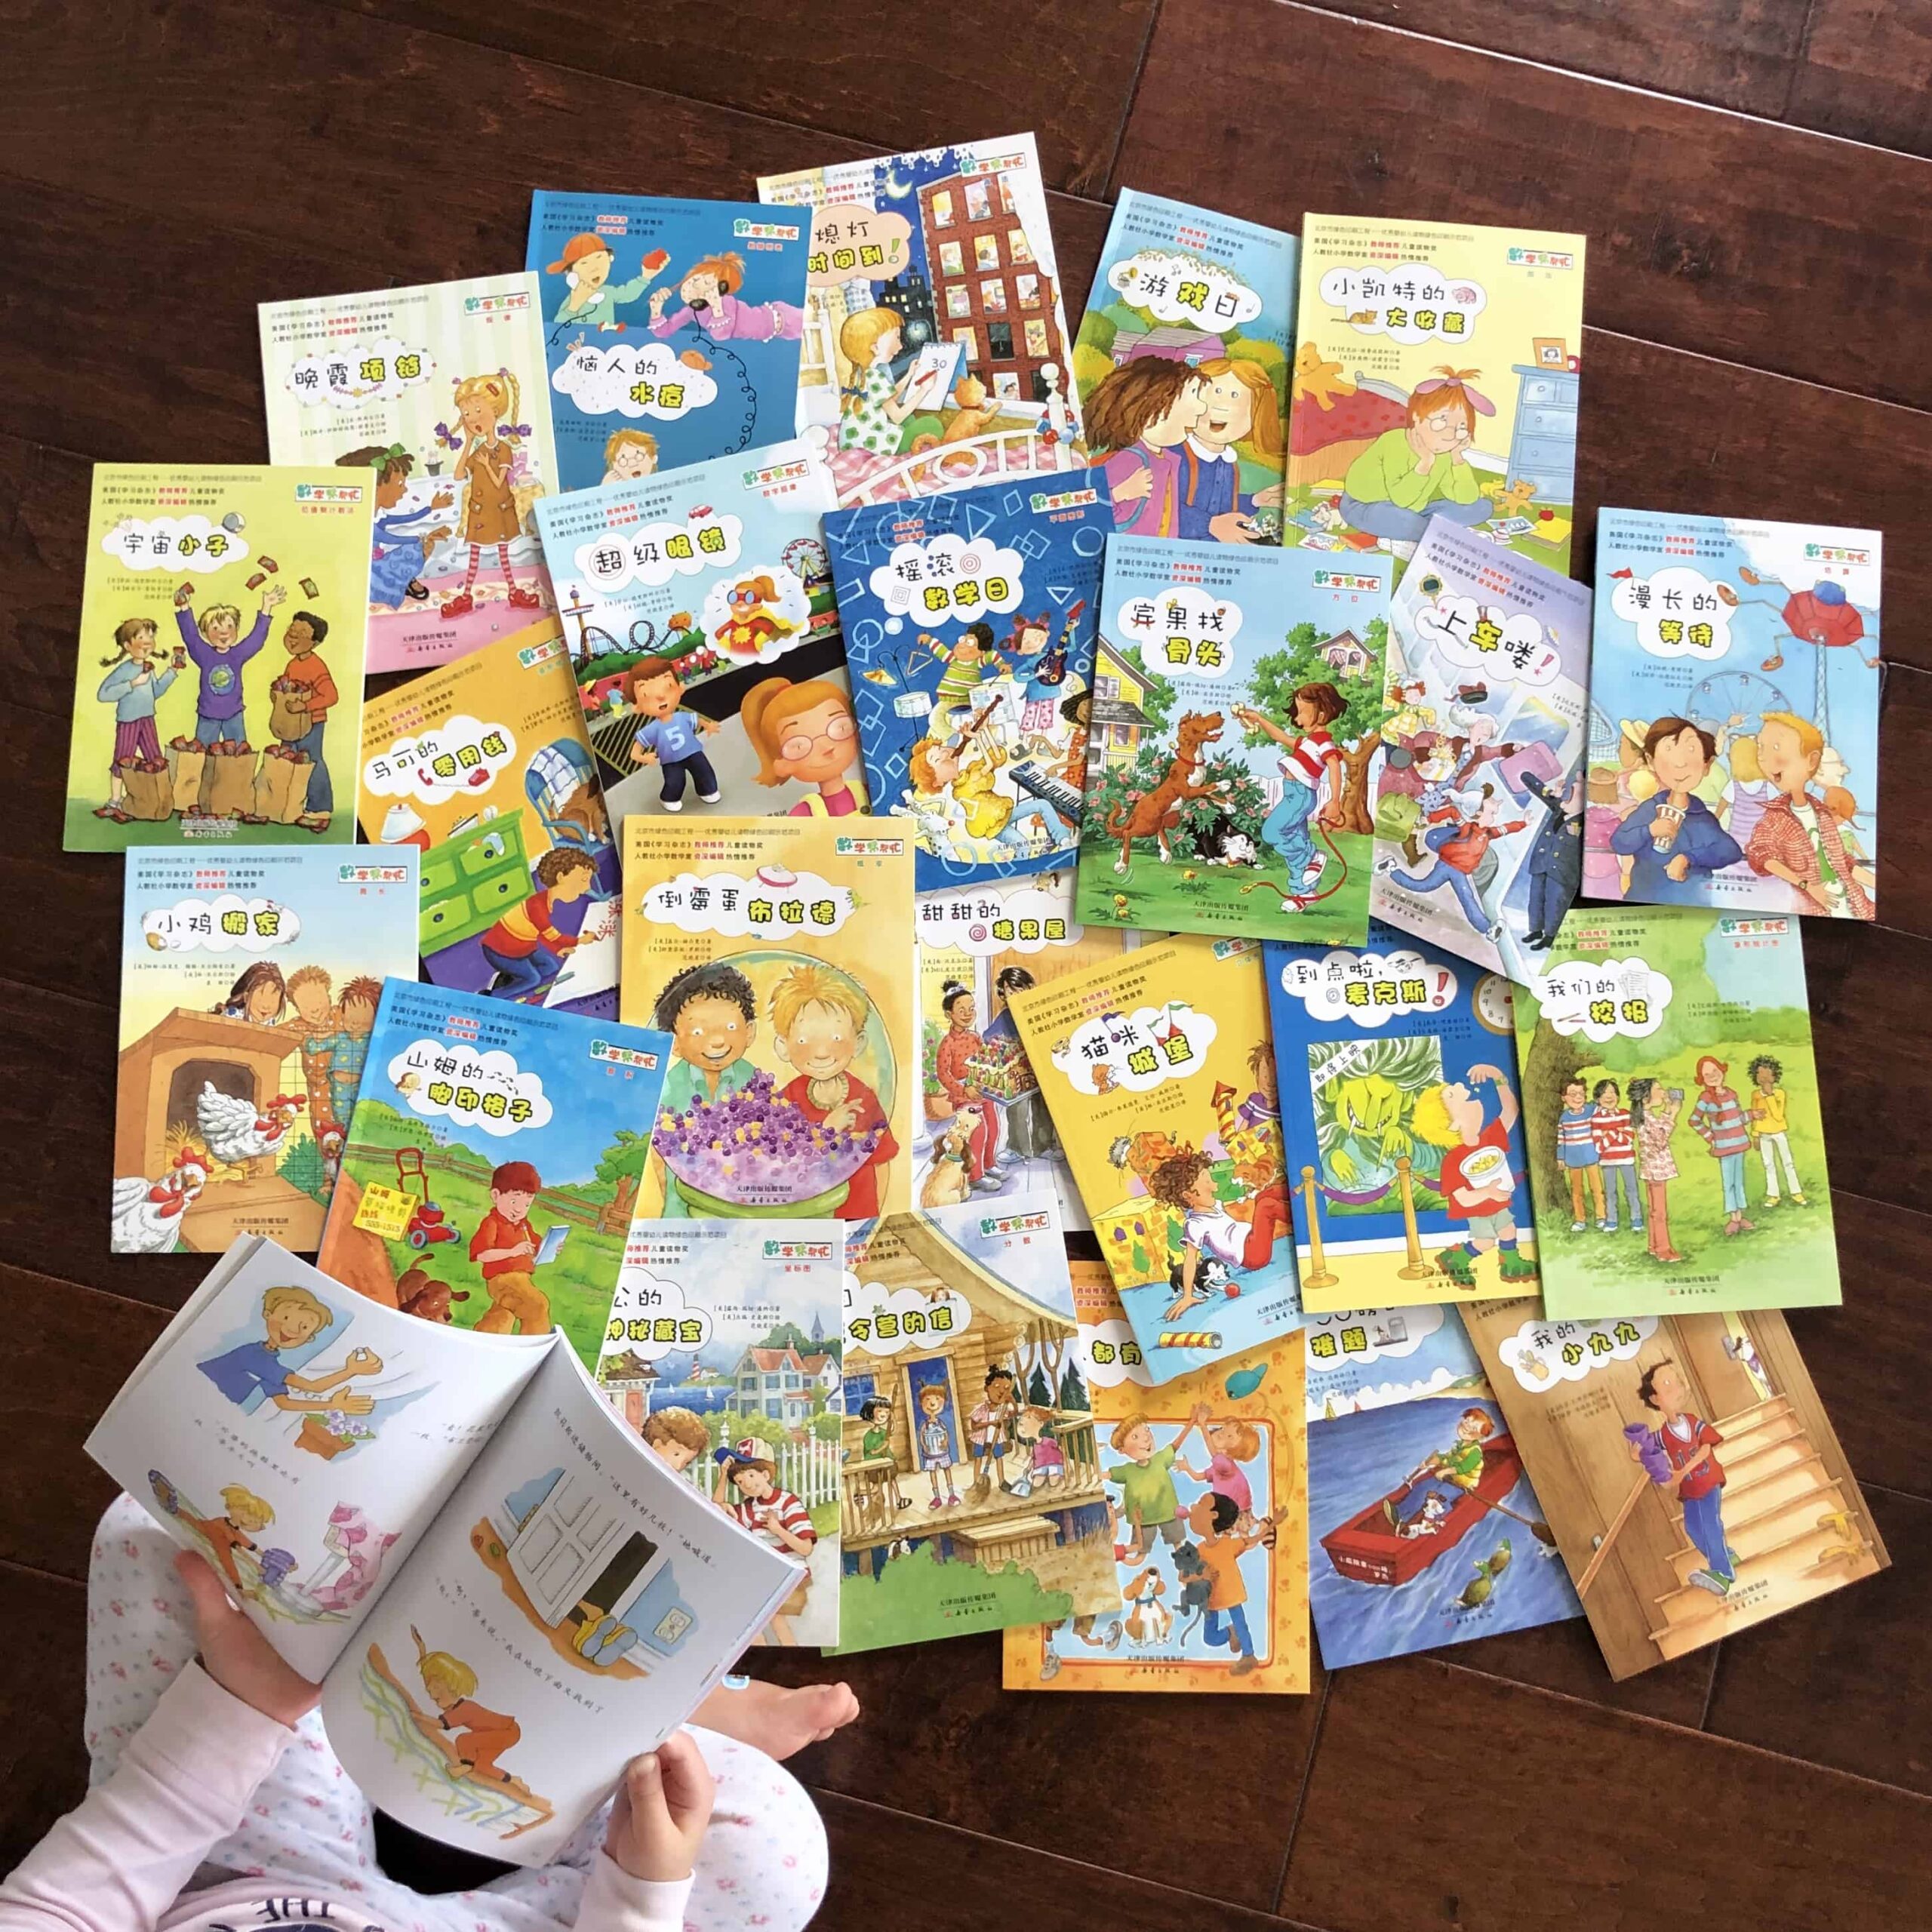 Math Story Books 数学帮帮忙 (Bilingual Simplified Chinese and English)